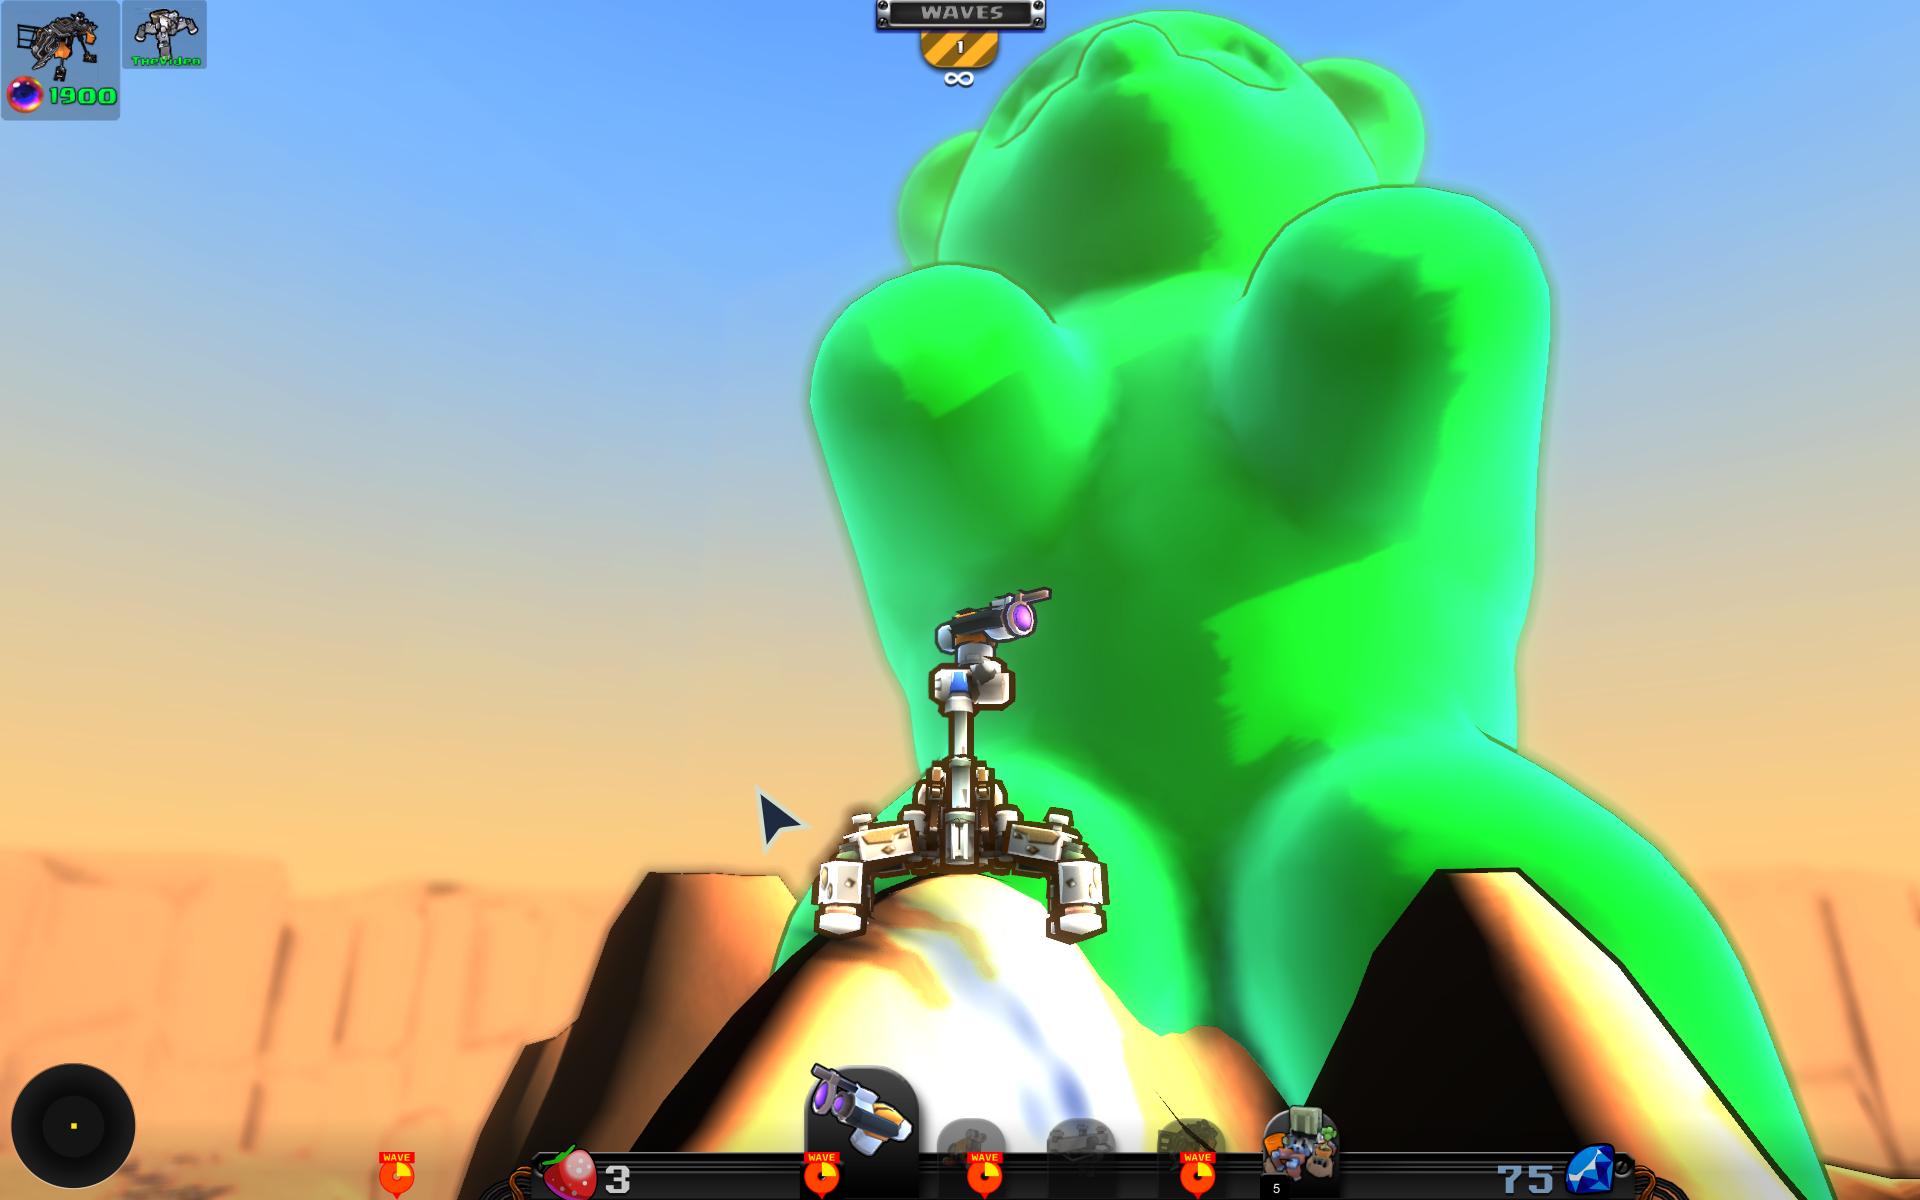 Why yes that is a picture of McDROID standing in front of a giant green Gummy Bear. Why? What did you think it was?